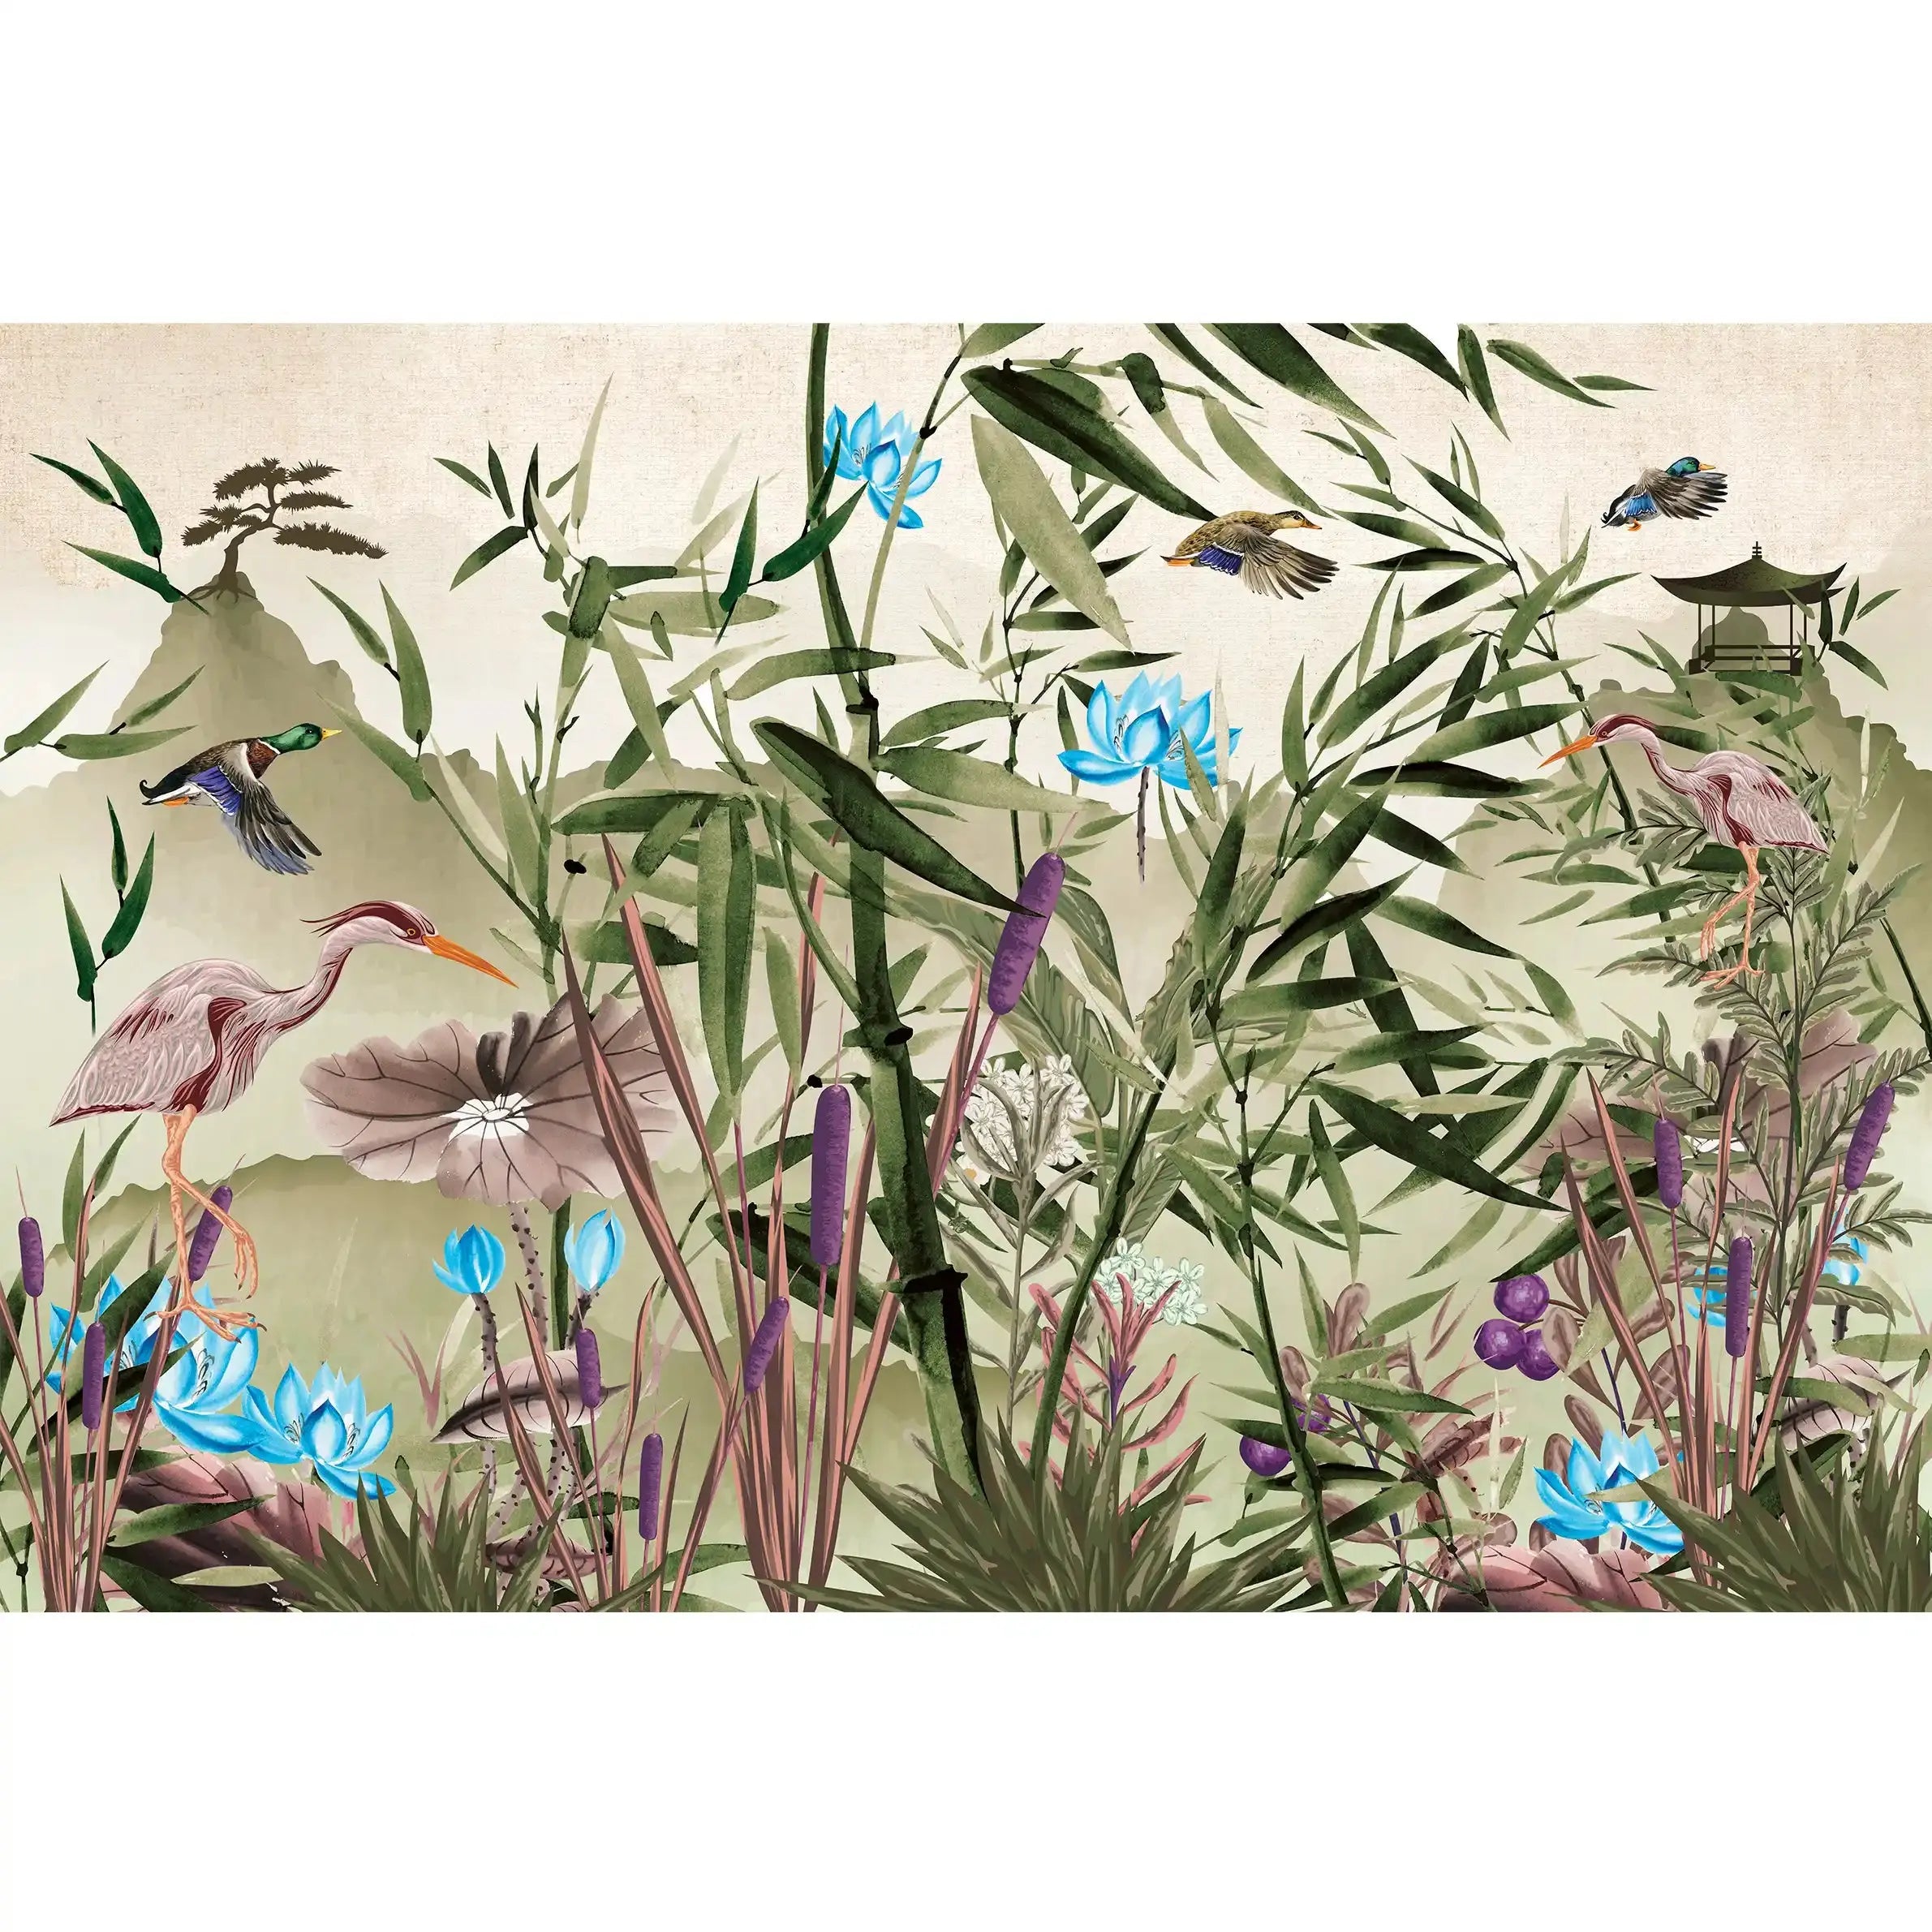 3057-C / Removable Wallpaper Peel and Stick - Watercolor Birds and Flowers, Oriental Painting Inspired, Easy Install, Wall Decor - Artevella